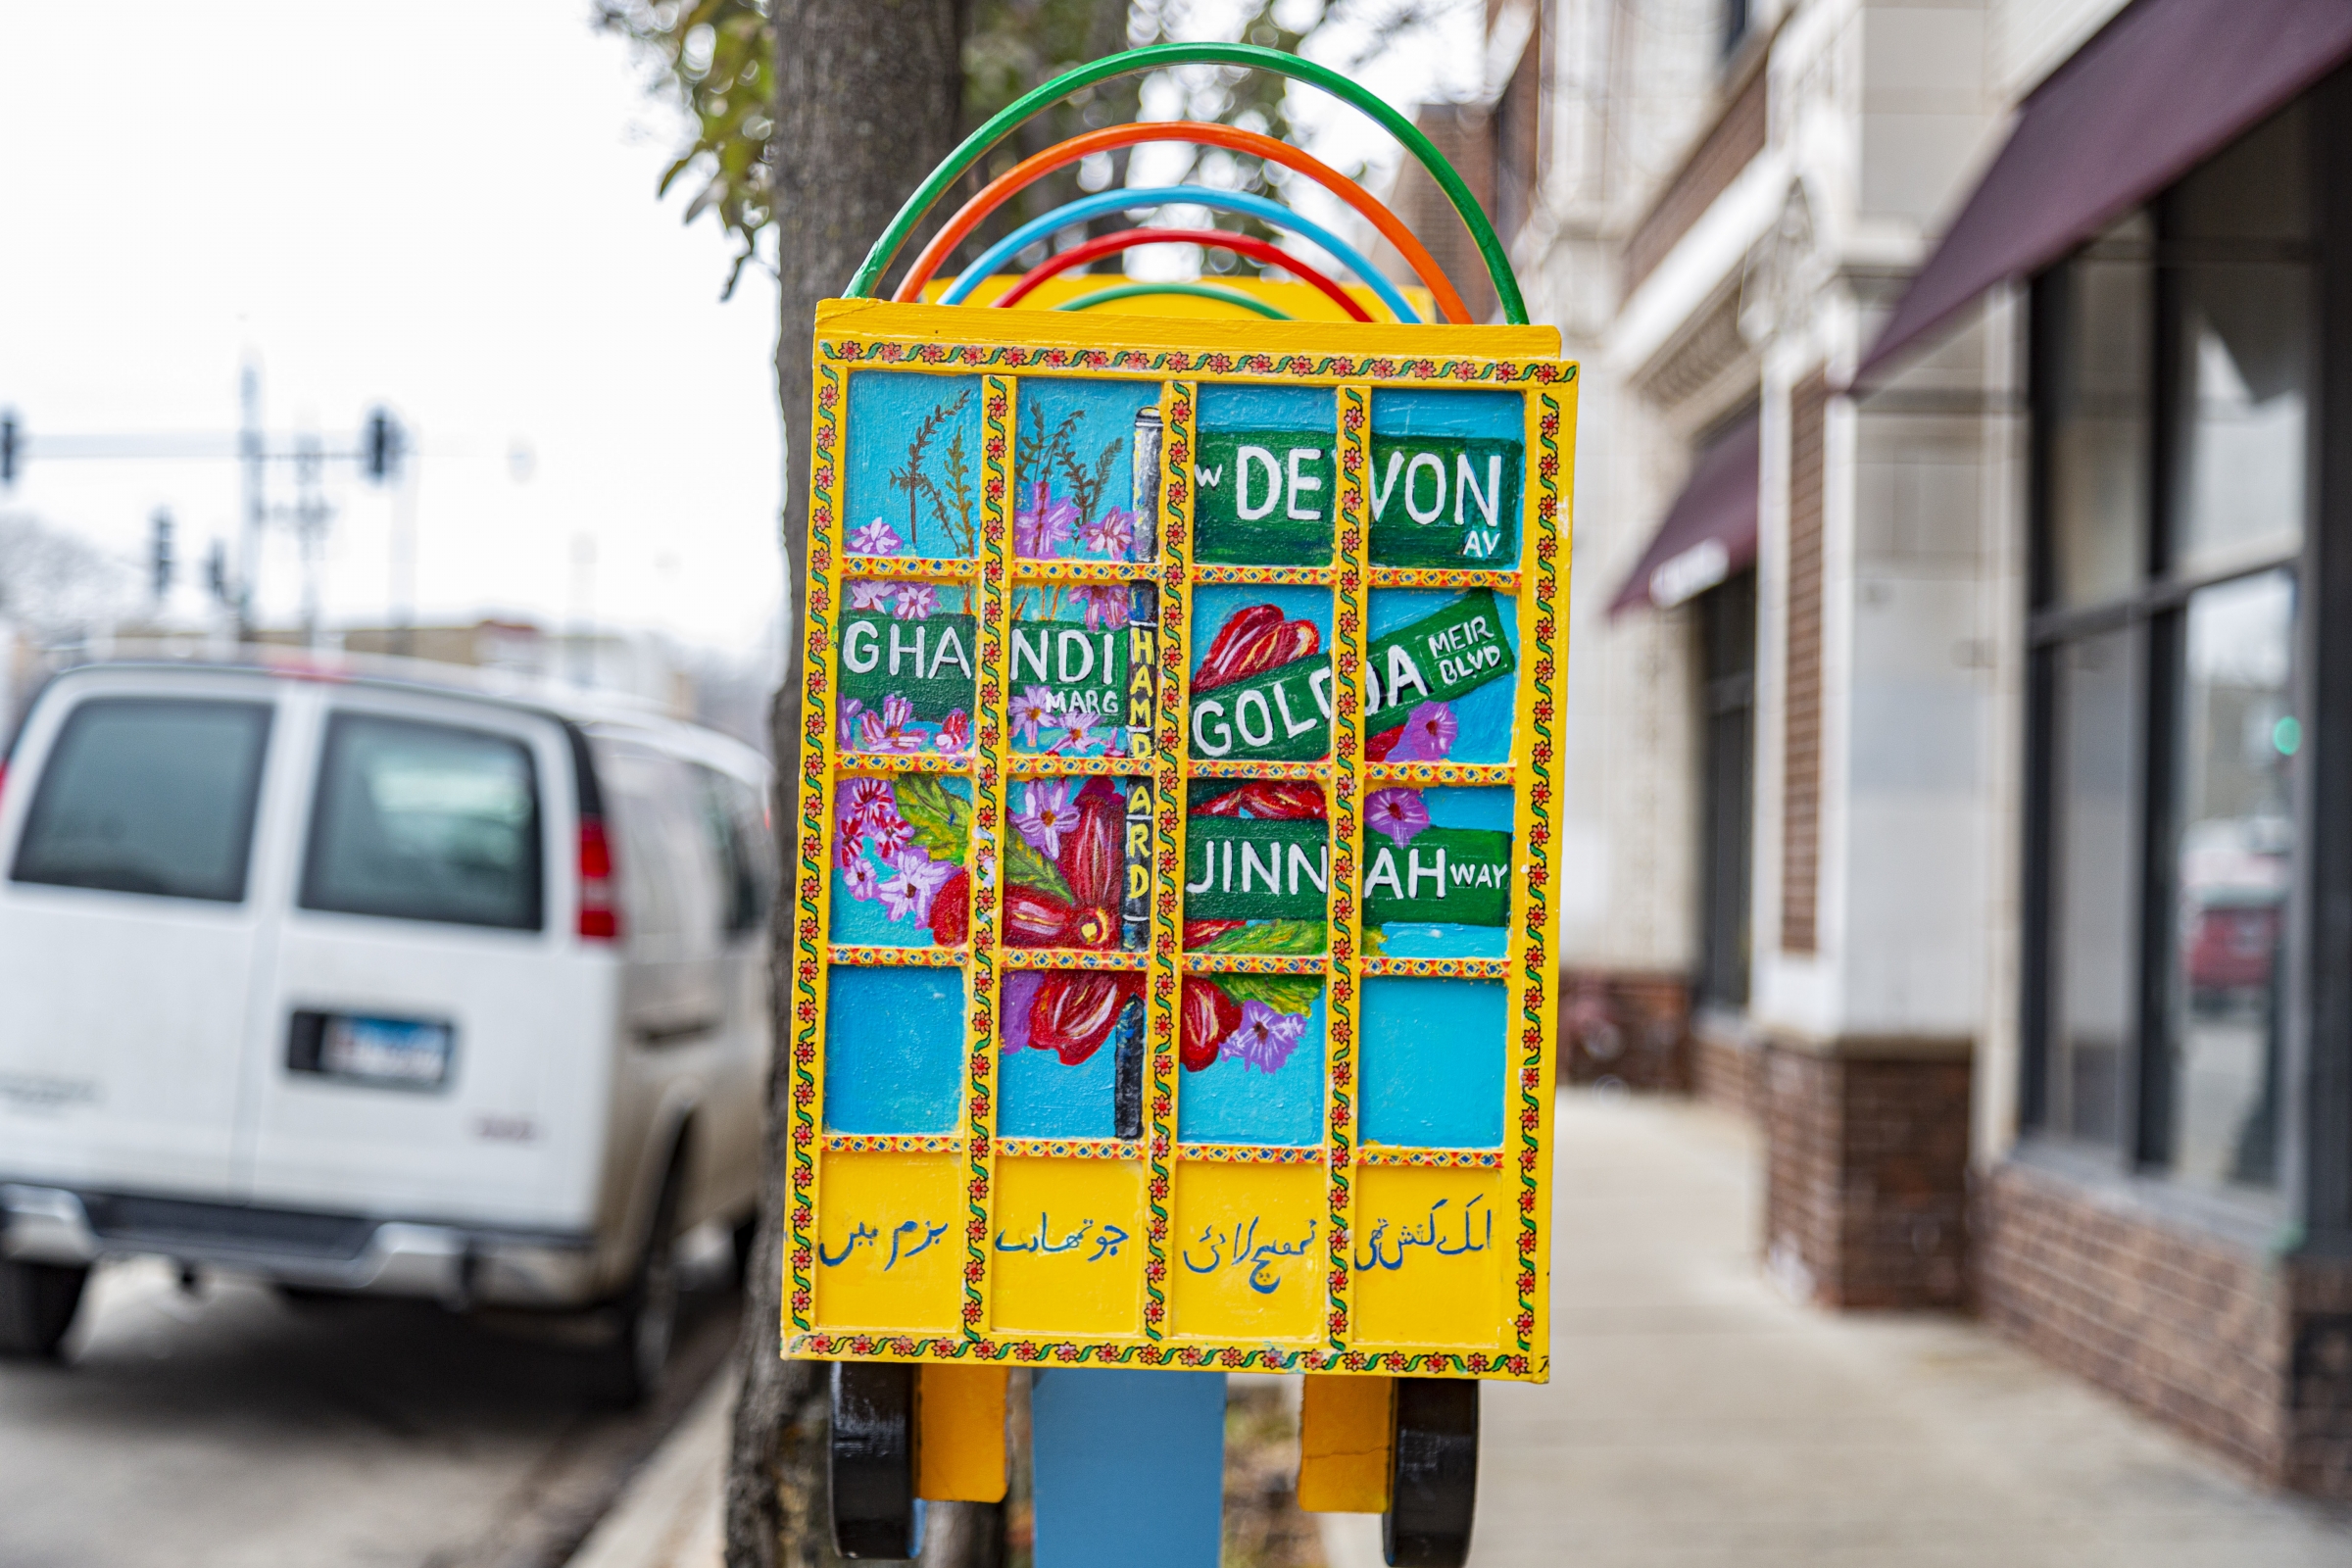 Urooj Shakeel's Truck Art Meets Little Free Library, installation view along Devon Avenue in Chicago. The image shows a small, yellow truck sculpture with bright multicolored images painted on each side, held up by a bright blue stake in the ground. Photo by Mark Blanchard.